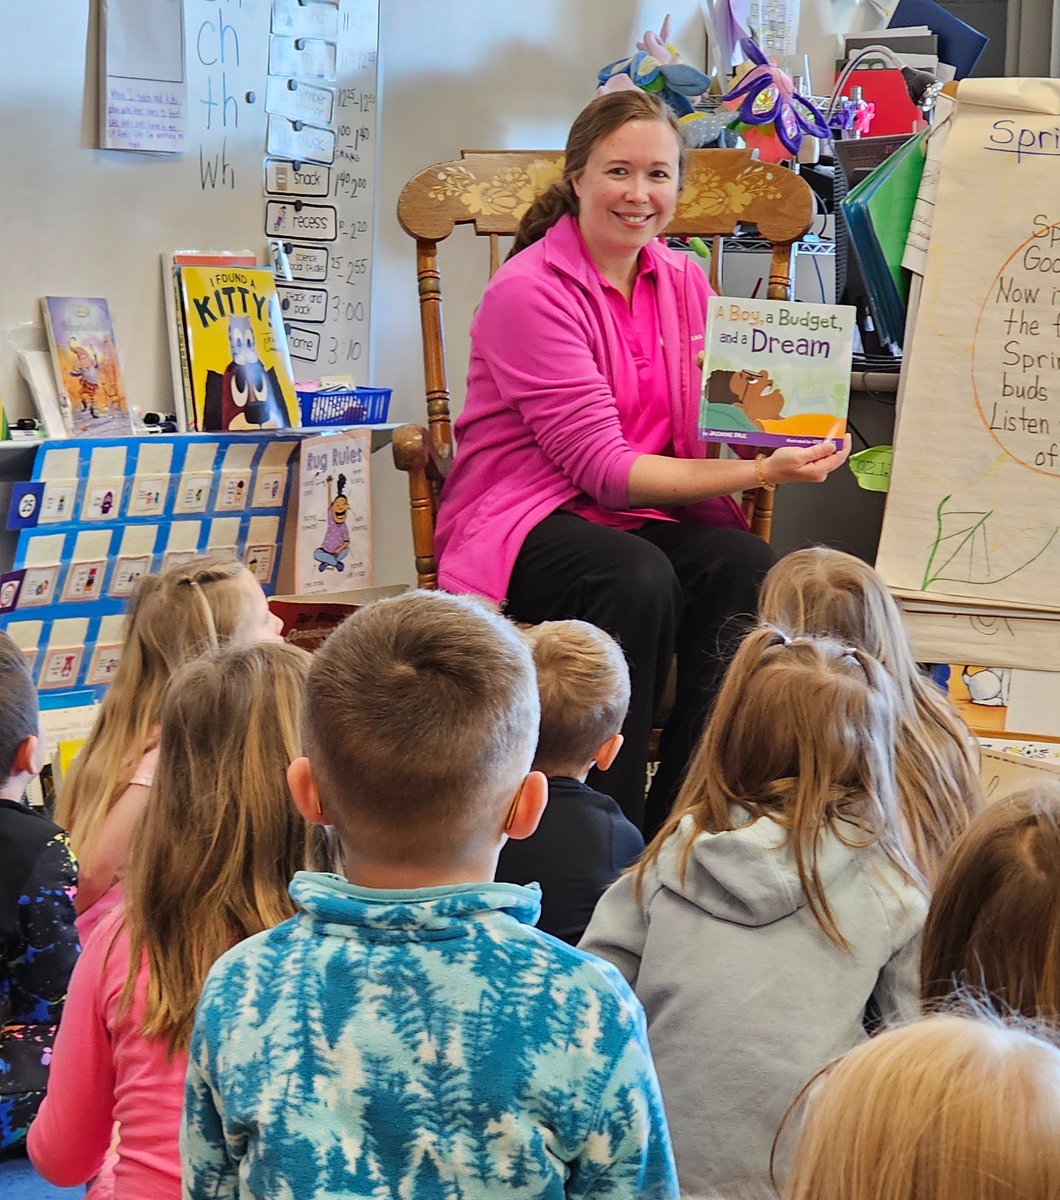 Rebecca Woock, our Universal Teller in Horicon, had a fantastic time reading and engaging with students at Horicon School District Elementary in honor of #TeachChildrentoSaveDay! #BanksPowerWI #powerofcommunity #communitybankingmonth #caringbankers #togetherdoinggood